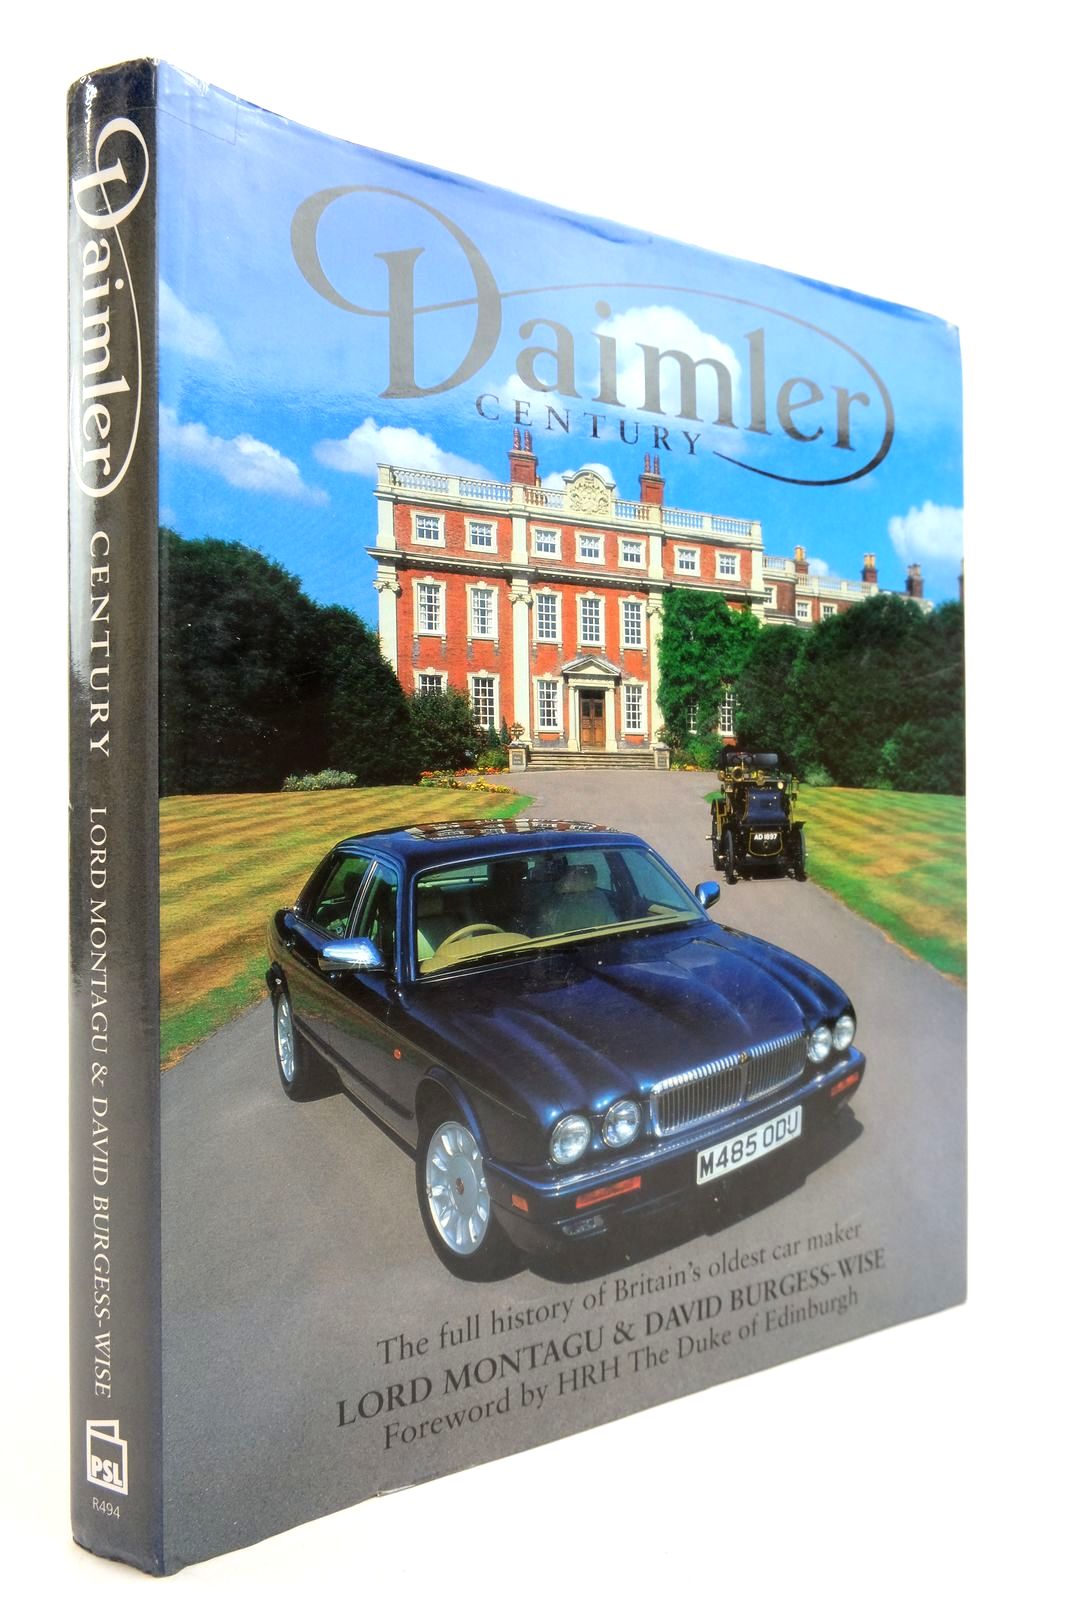 Photo of DAIMLER CENTURY THE FULL HISTORY OF BRITAIN'S OLDEST CAR MAKER- Stock Number: 2139382